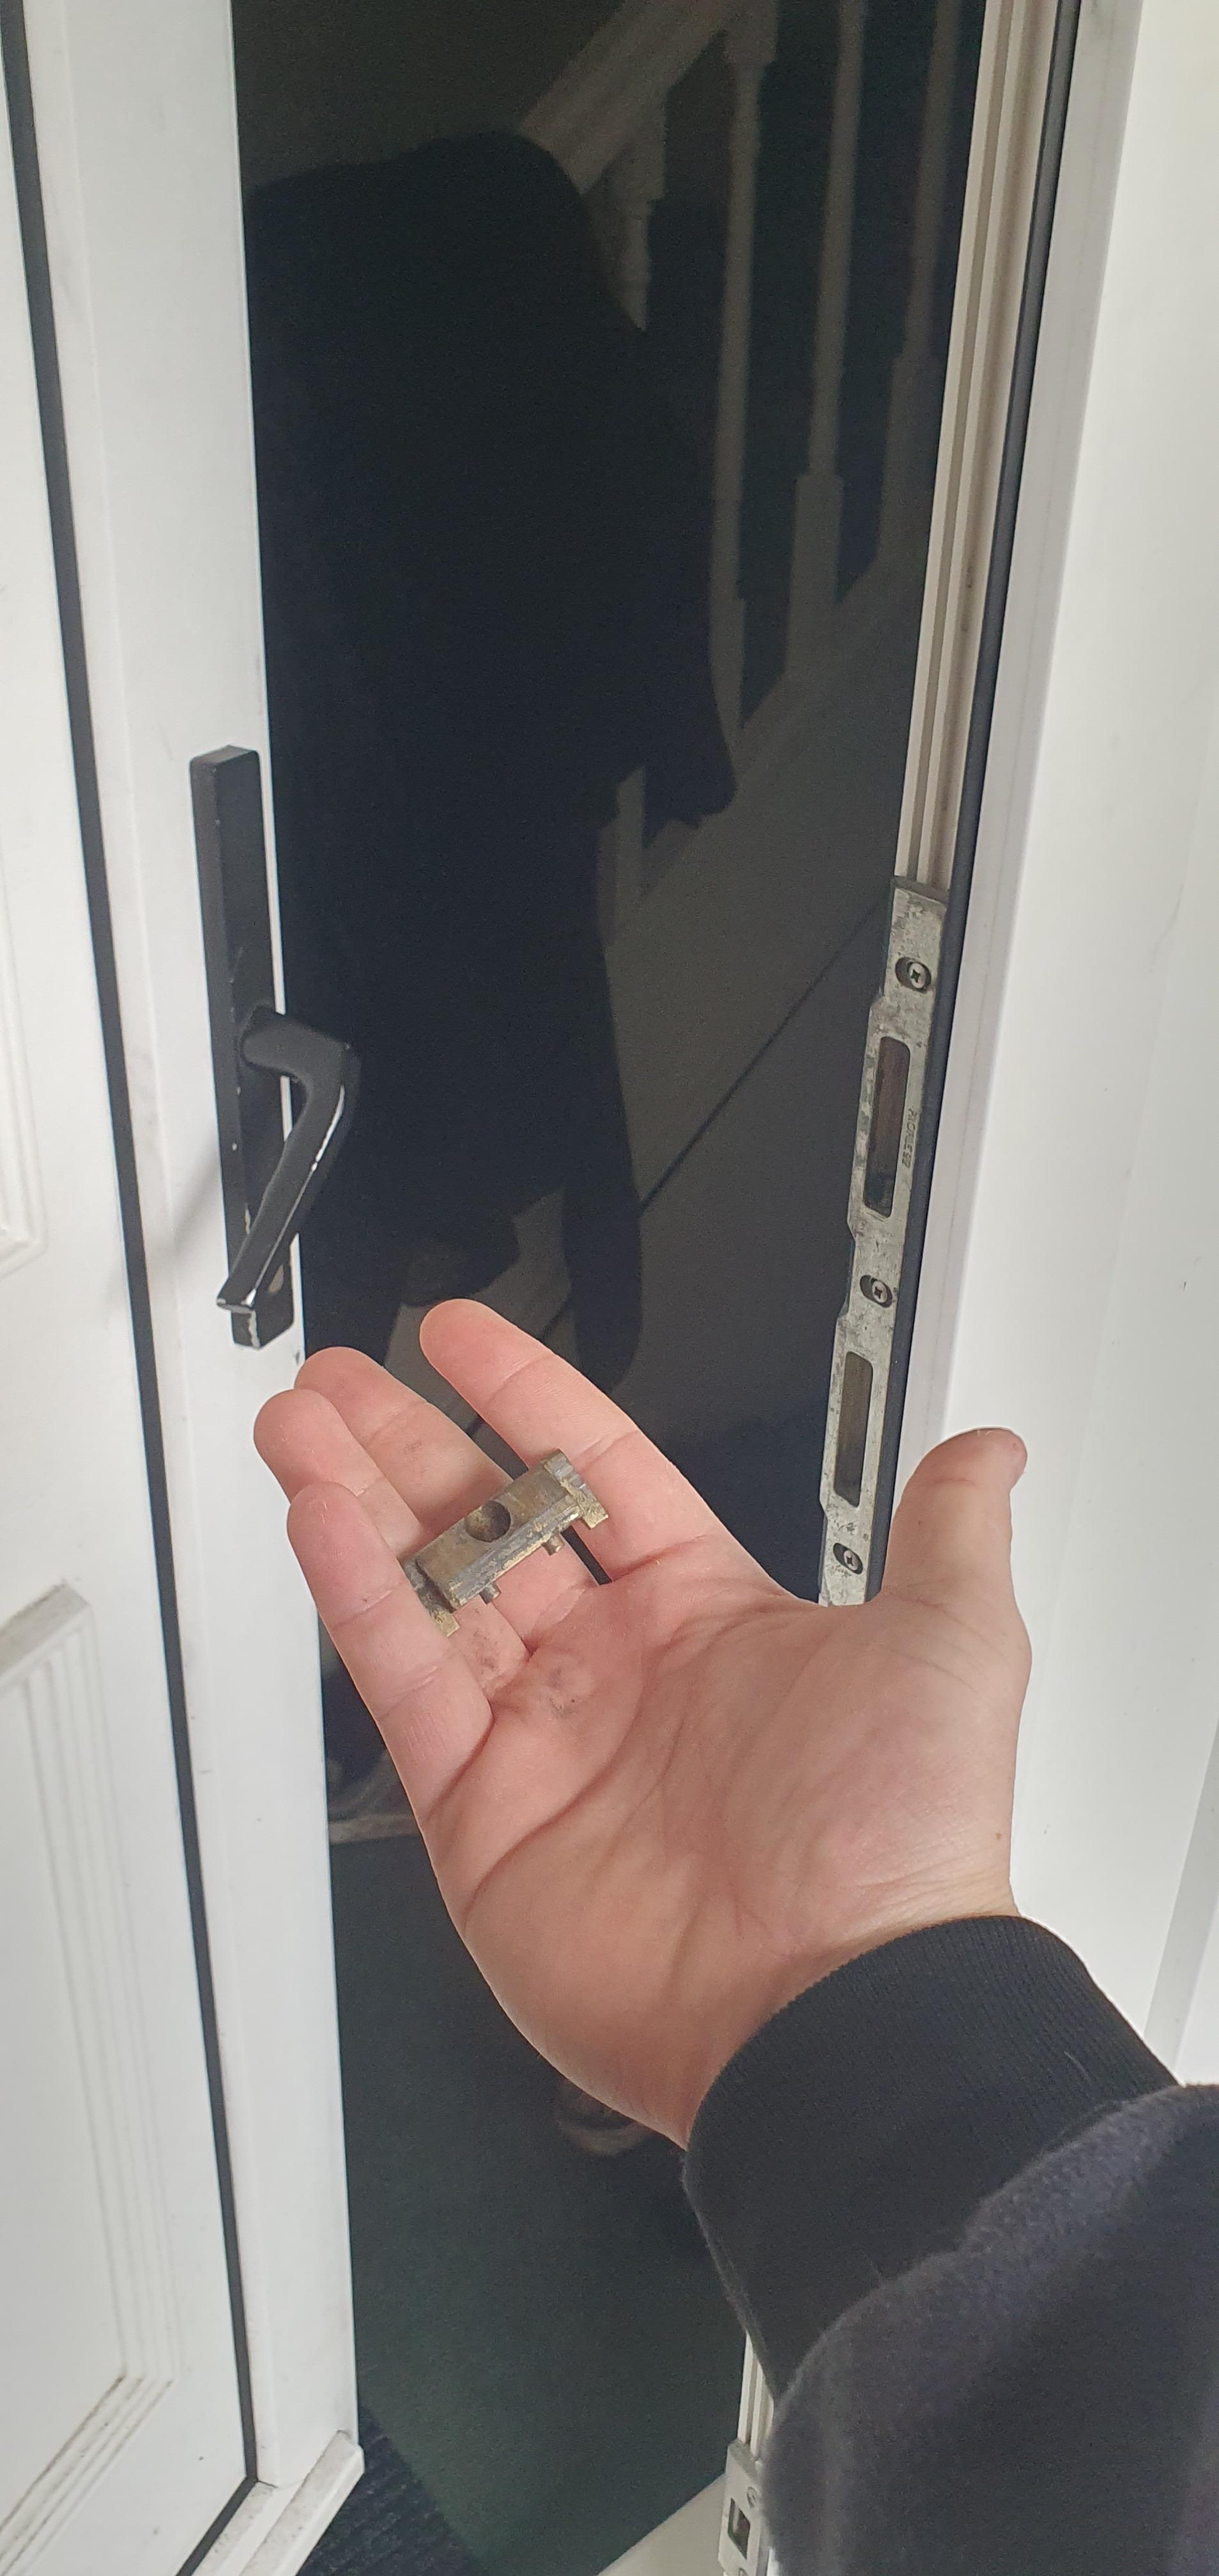 Anthony from AD Locksmithing holding open a door with a pick that has been opened when the customer was locked out and rang for an emergency locksmith